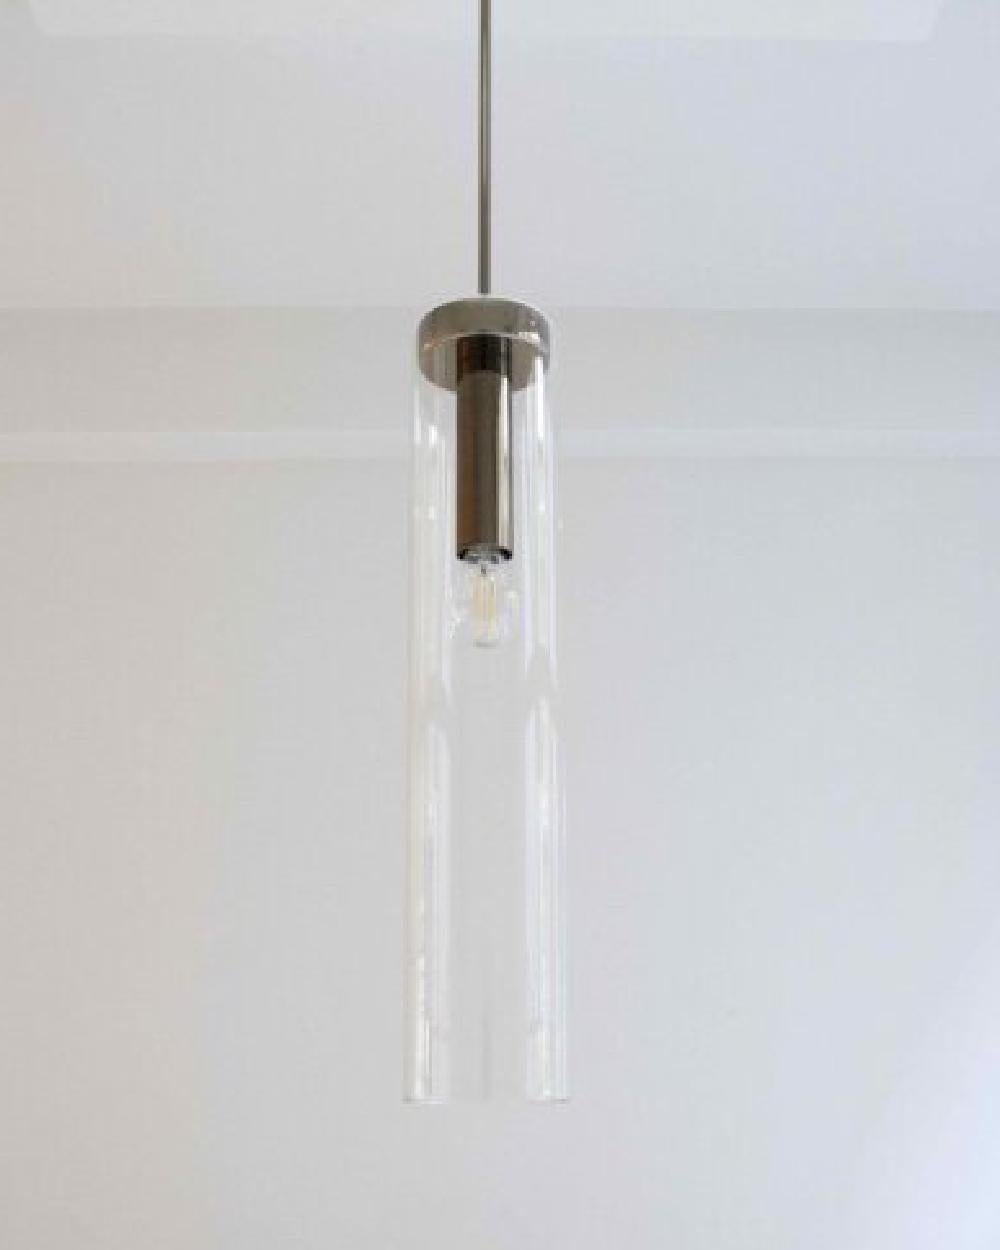 “Church architecture,” says John Pawson, “has been a real source of fantastic art throughout the centuries. Light and candles are a big part of its decorative expression.” Pendant Tube was created for large spaces, drawing its inspiration from